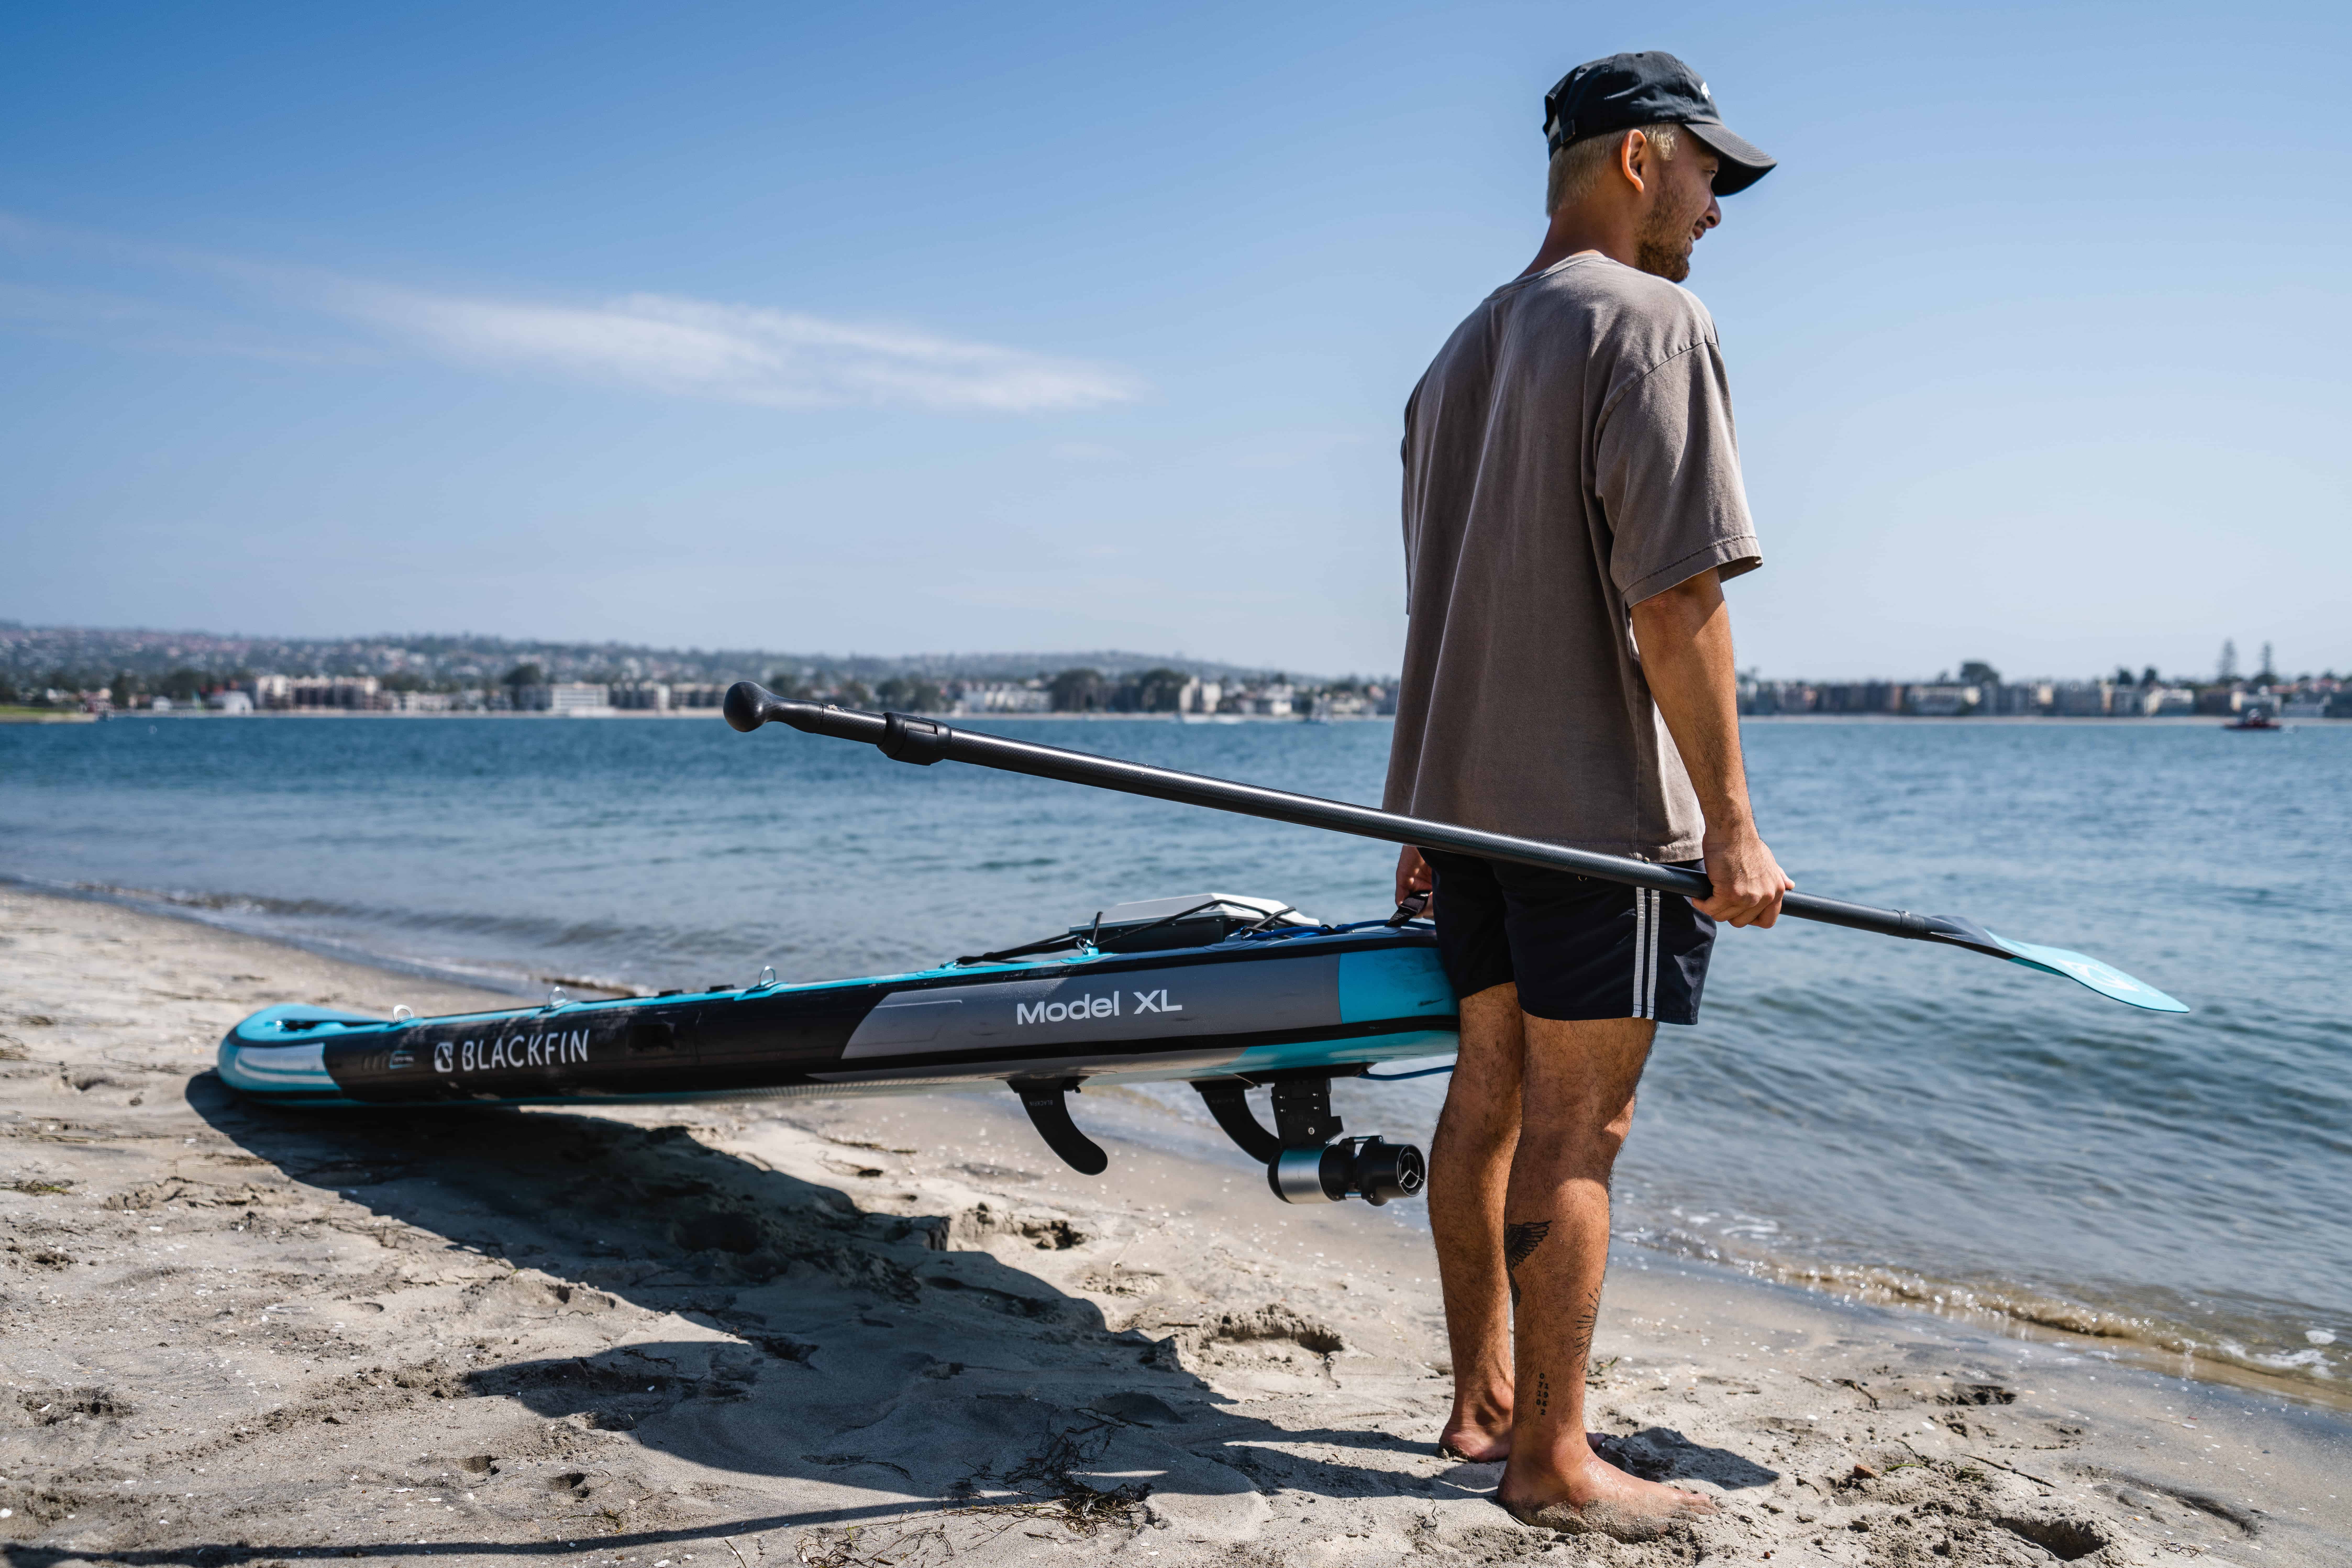 Man getting ready to take paddle board out with DIY fin adapter